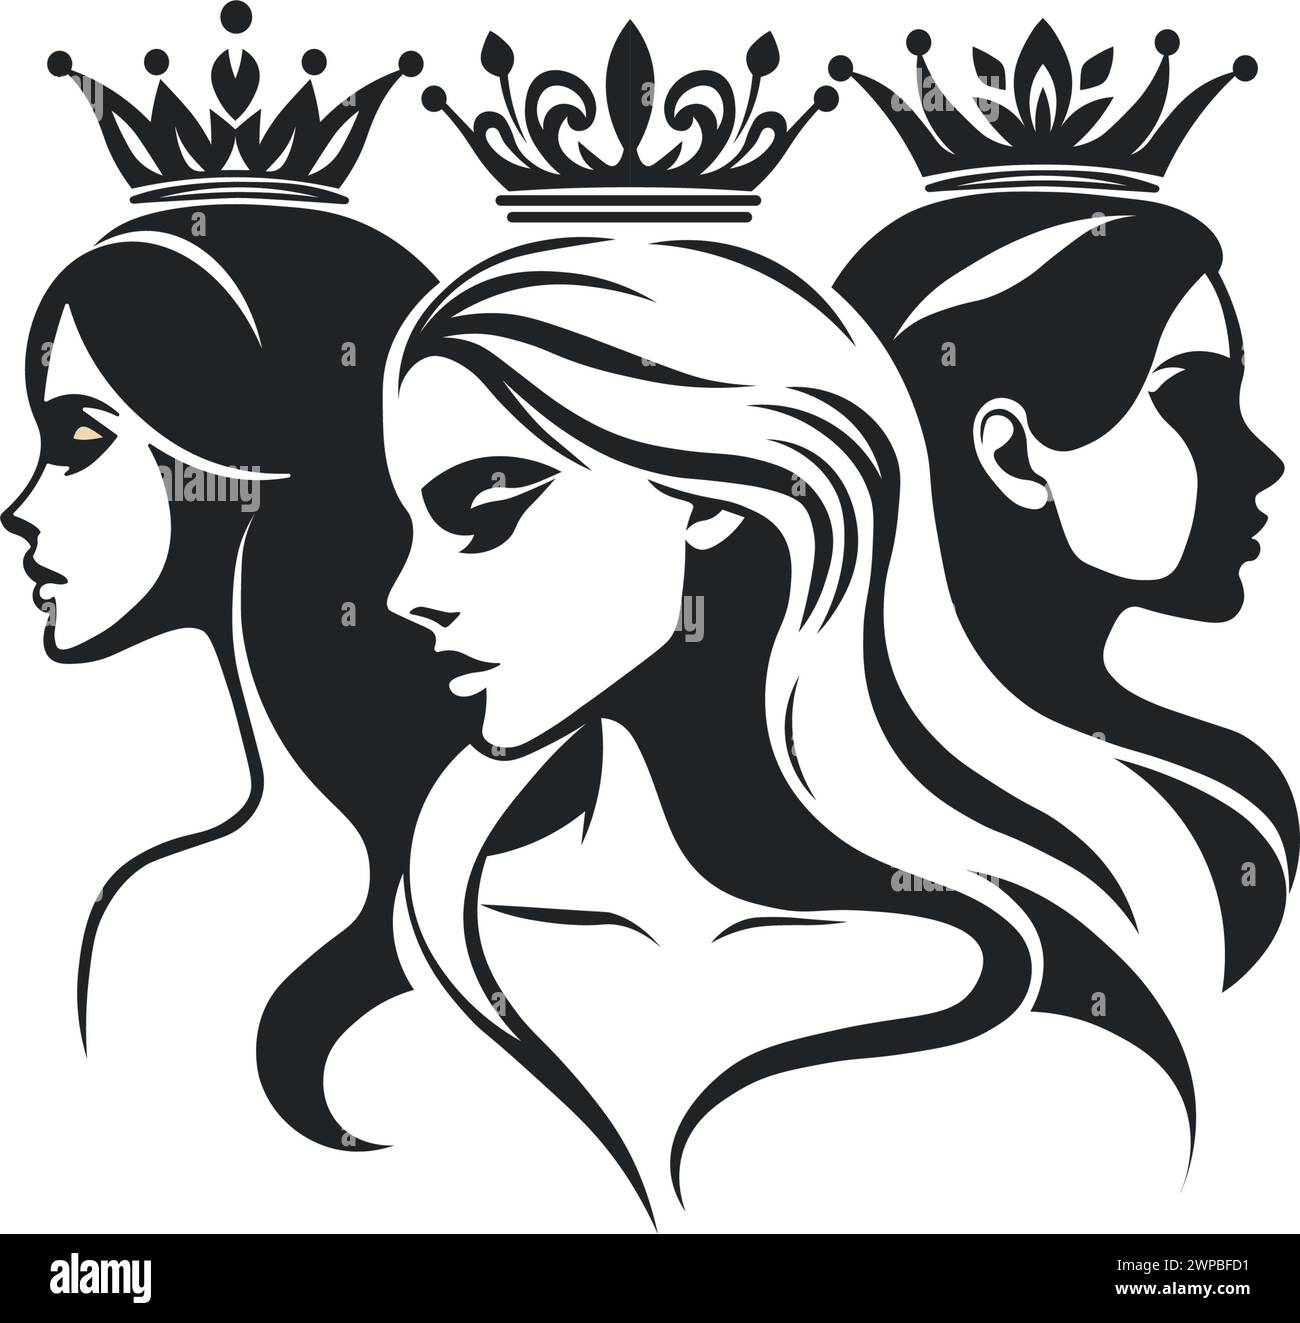 Vector black and white illustration, portrait of three girls with crowns over their heads for Women's Day or Mother's Day Stock Vector